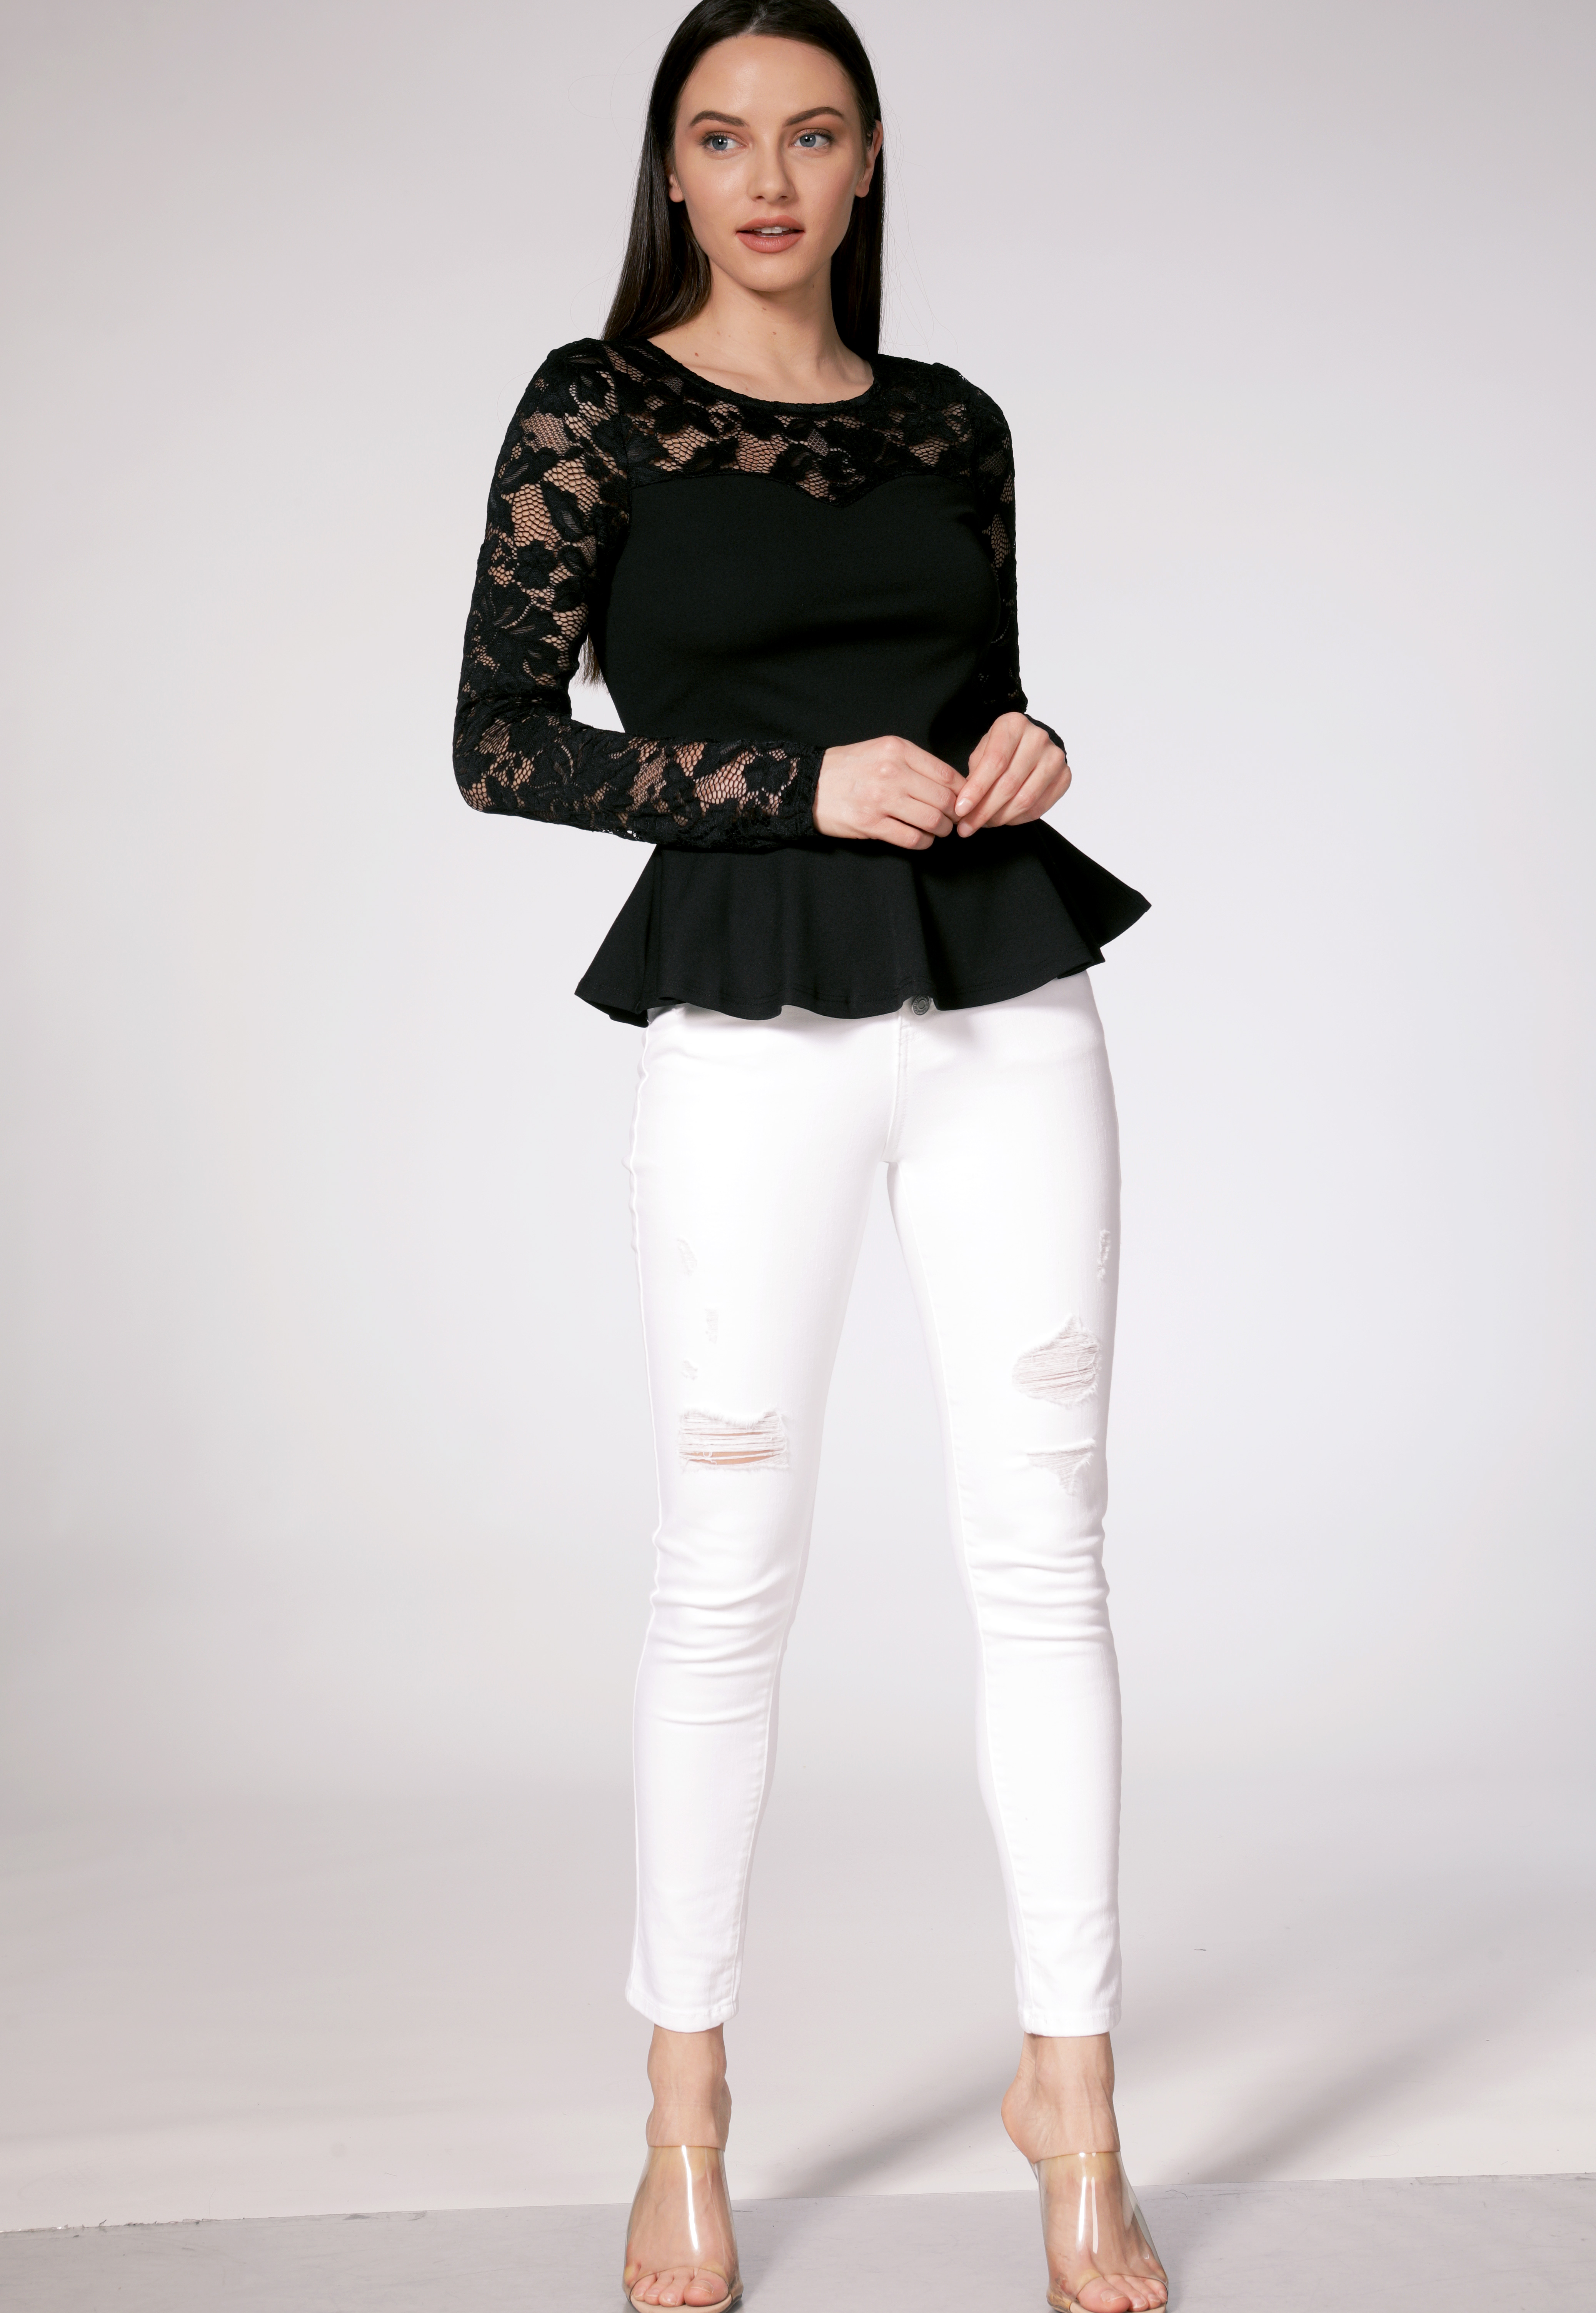 Floral Lace Dressy Top